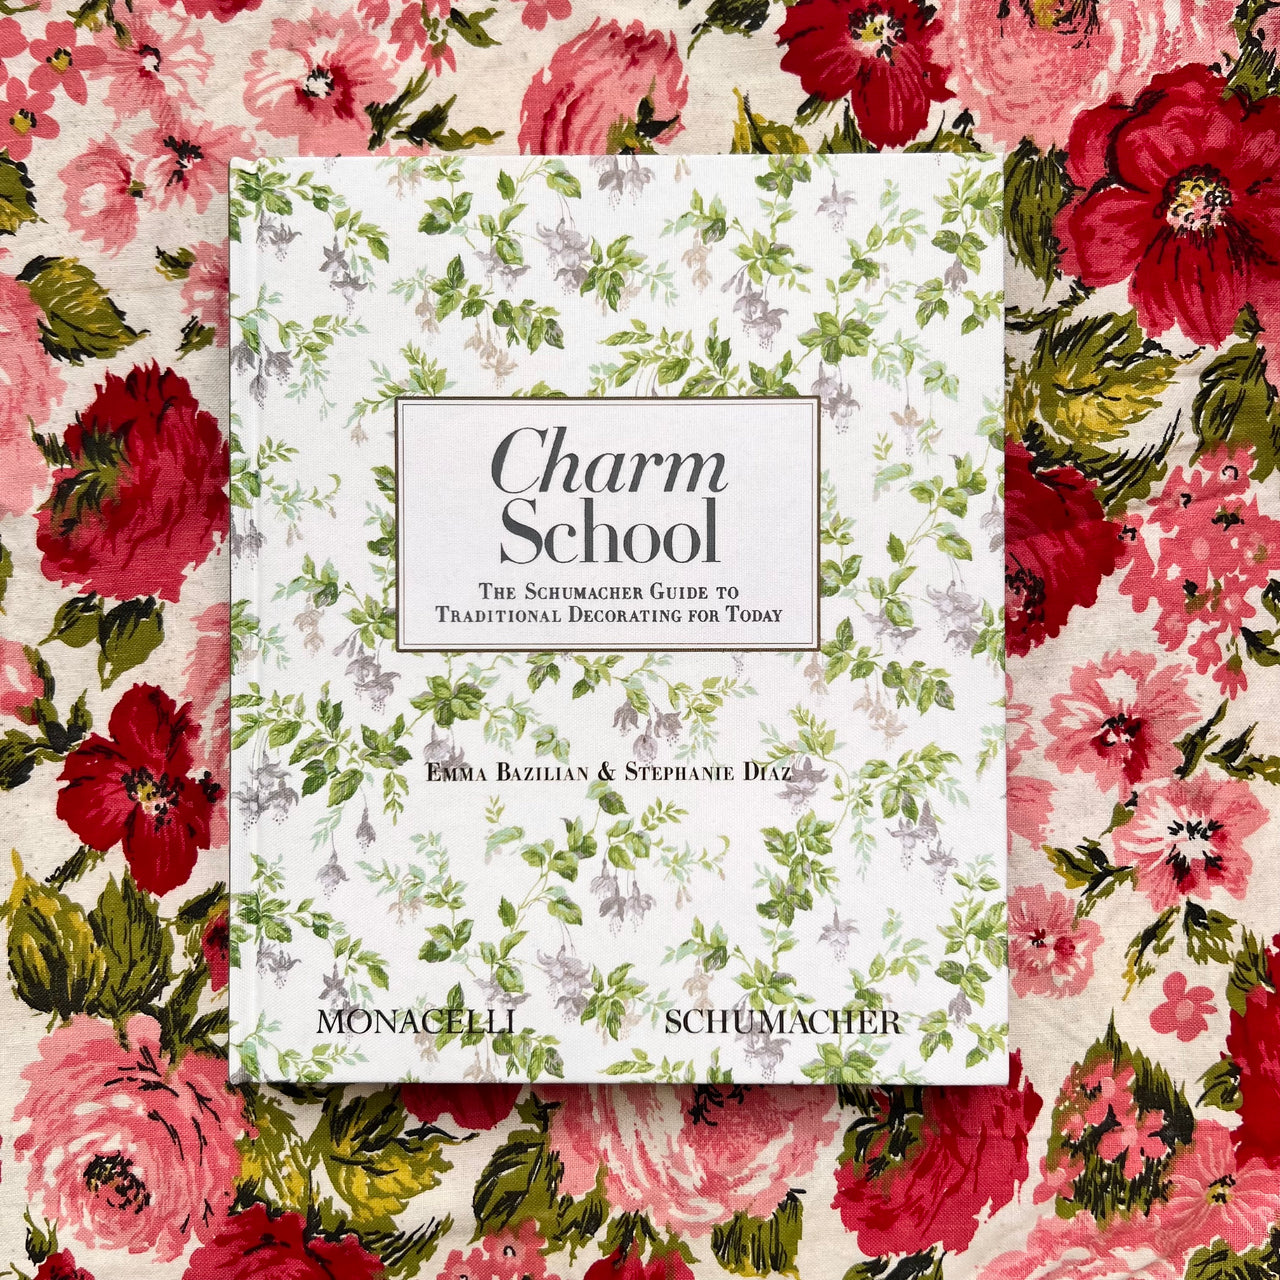 Charm School - The Schumacher Guide to Traditional Decorating for Today